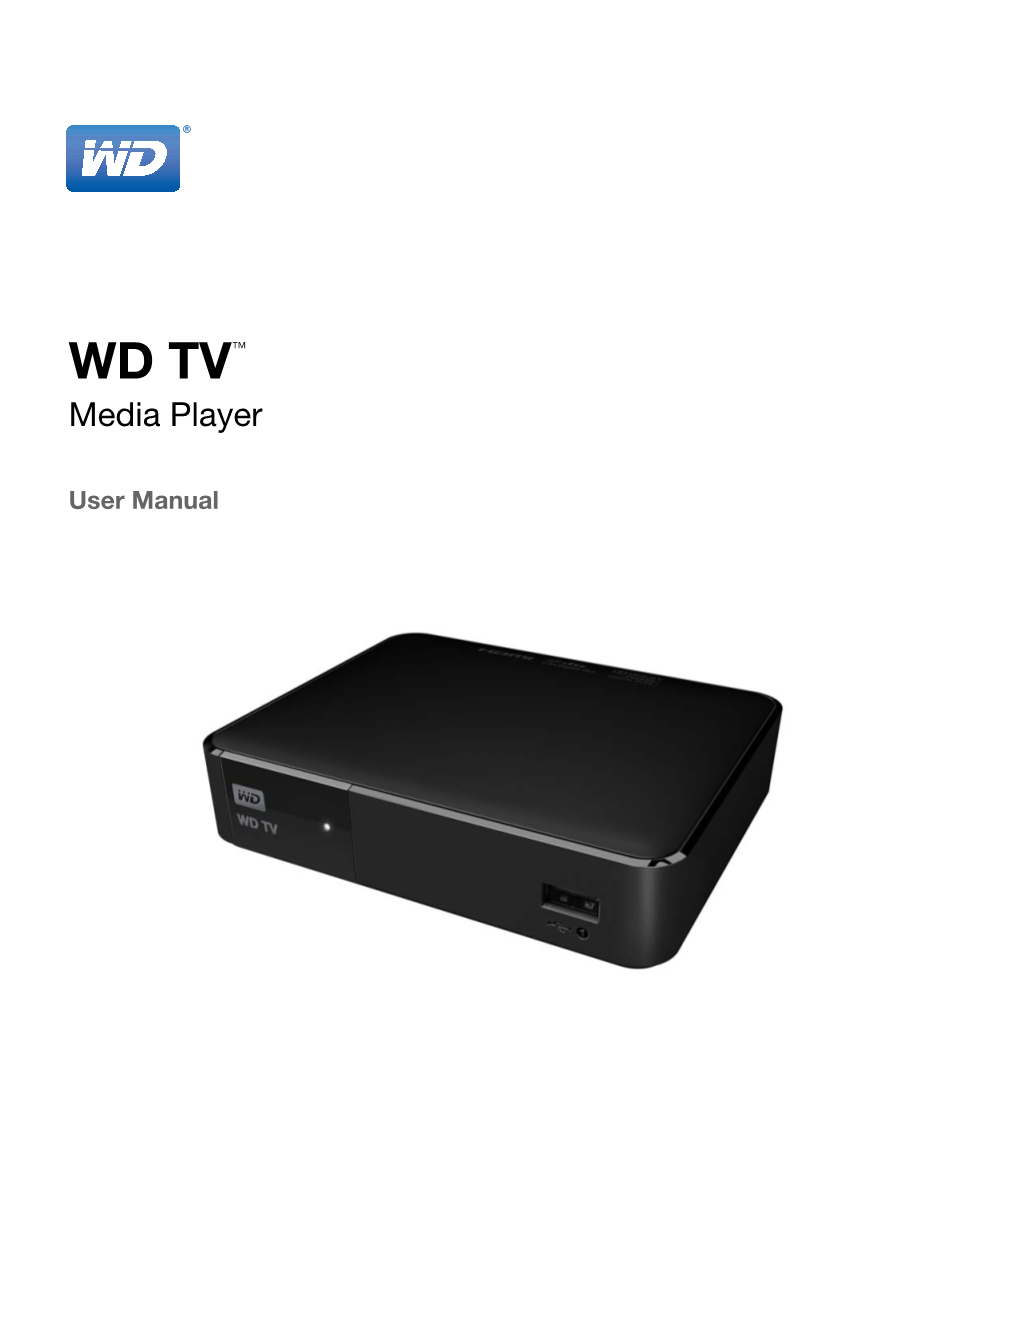 WD TV Media Player User Manual 1 Important User Information Important Safety Instructions This Device Is Designed and Manufactured to Assure Personal Safety